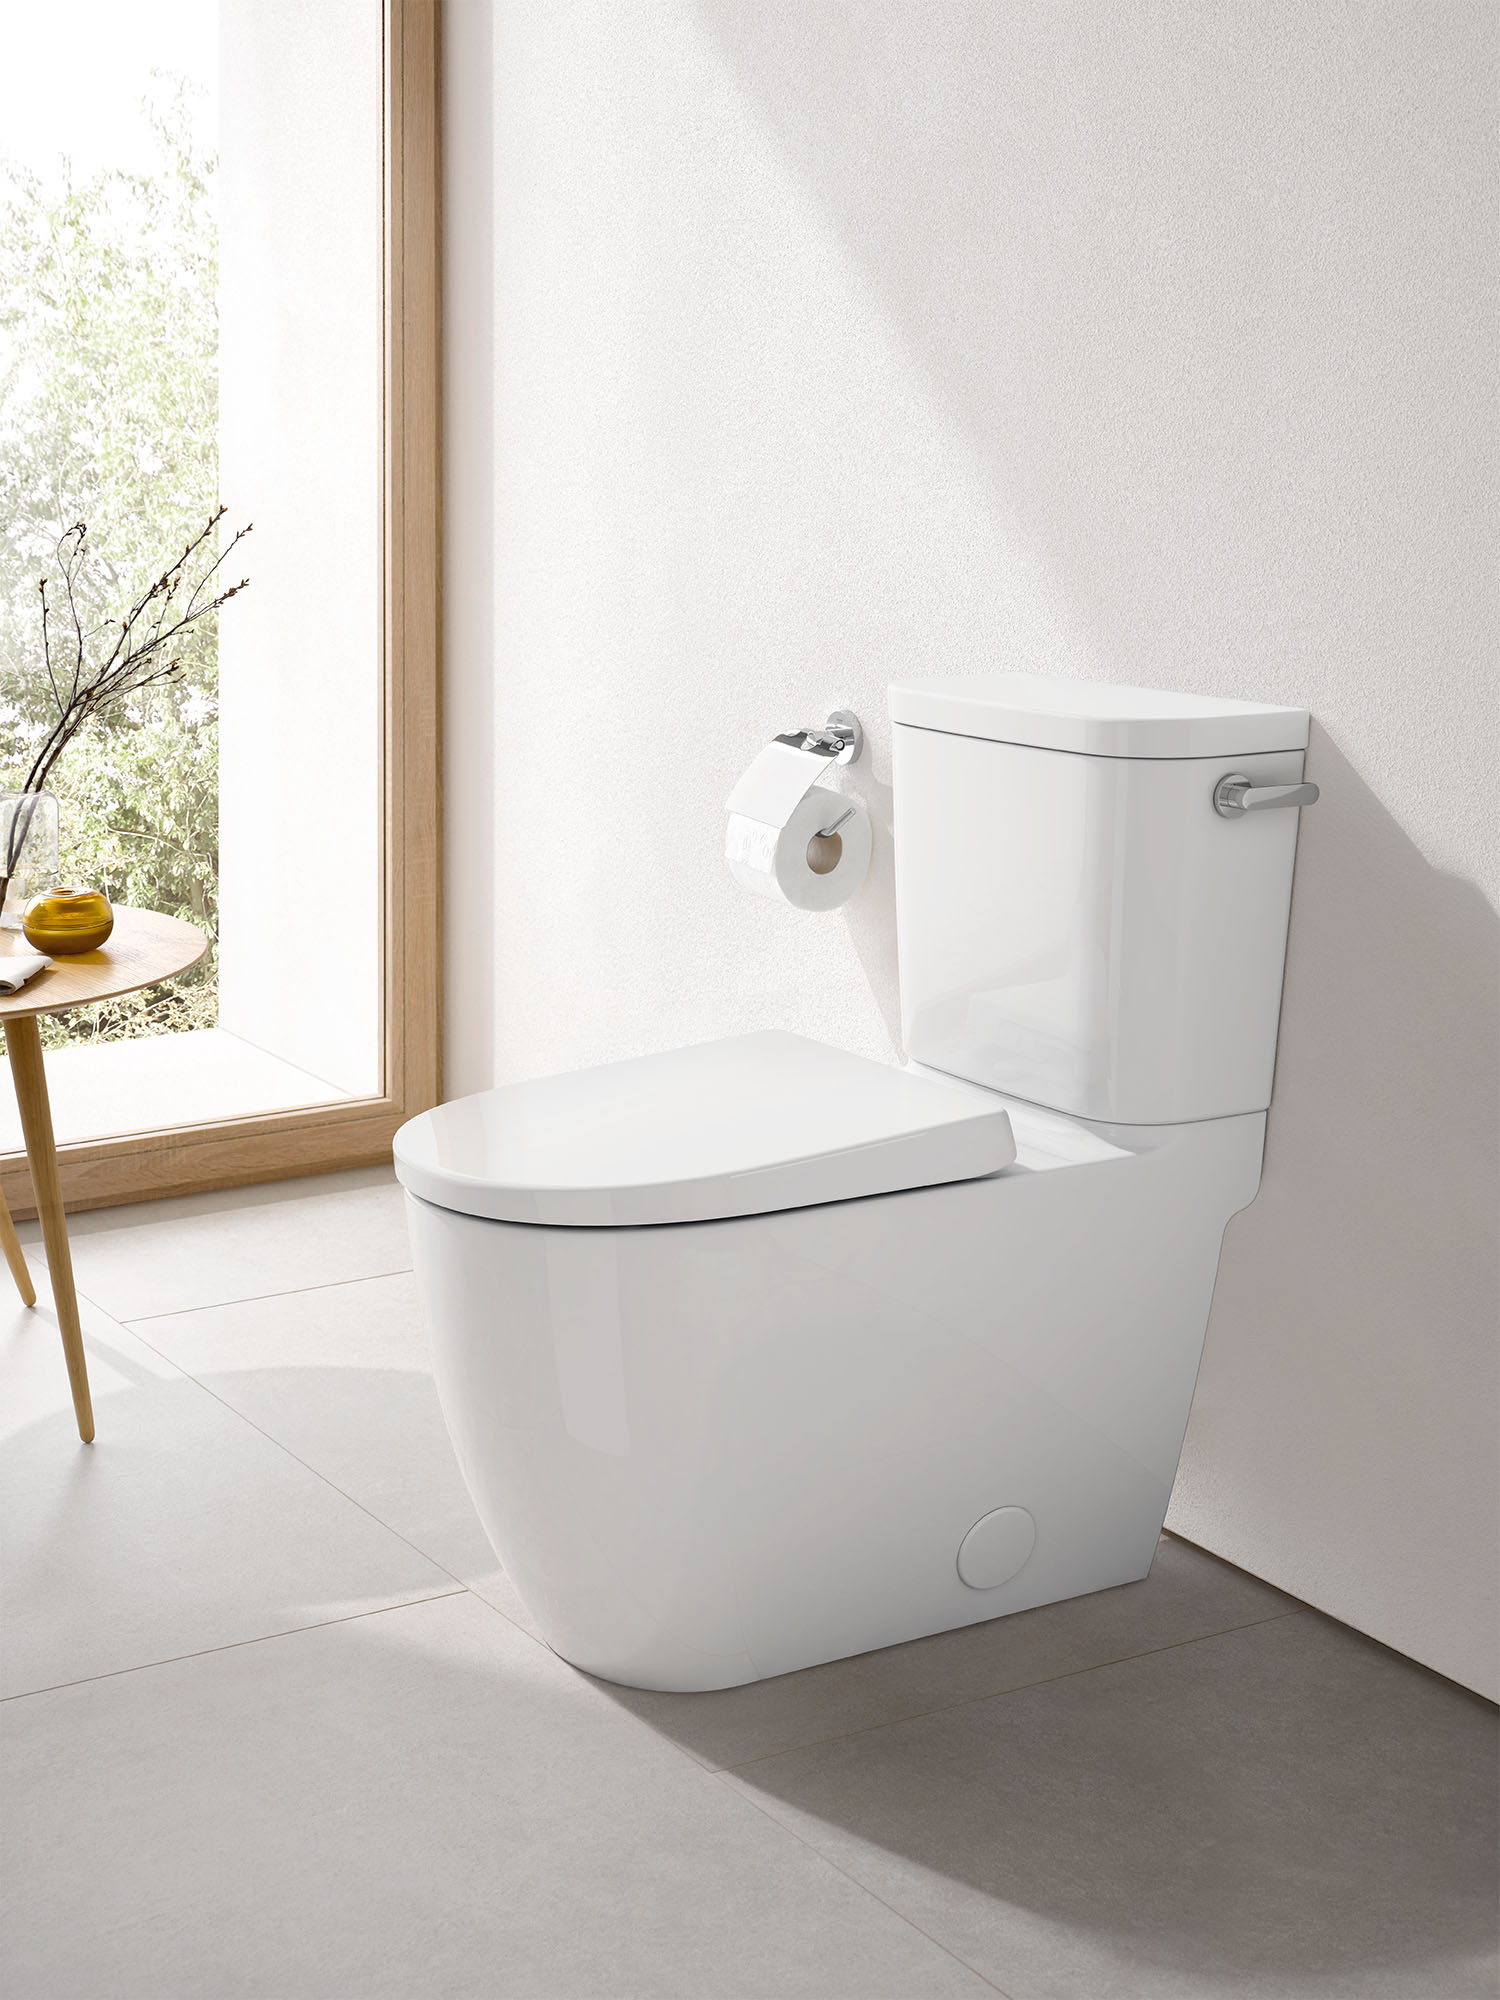 Two-piece Right height Elongated Toilet with seat, Right-Hand Trip Lever